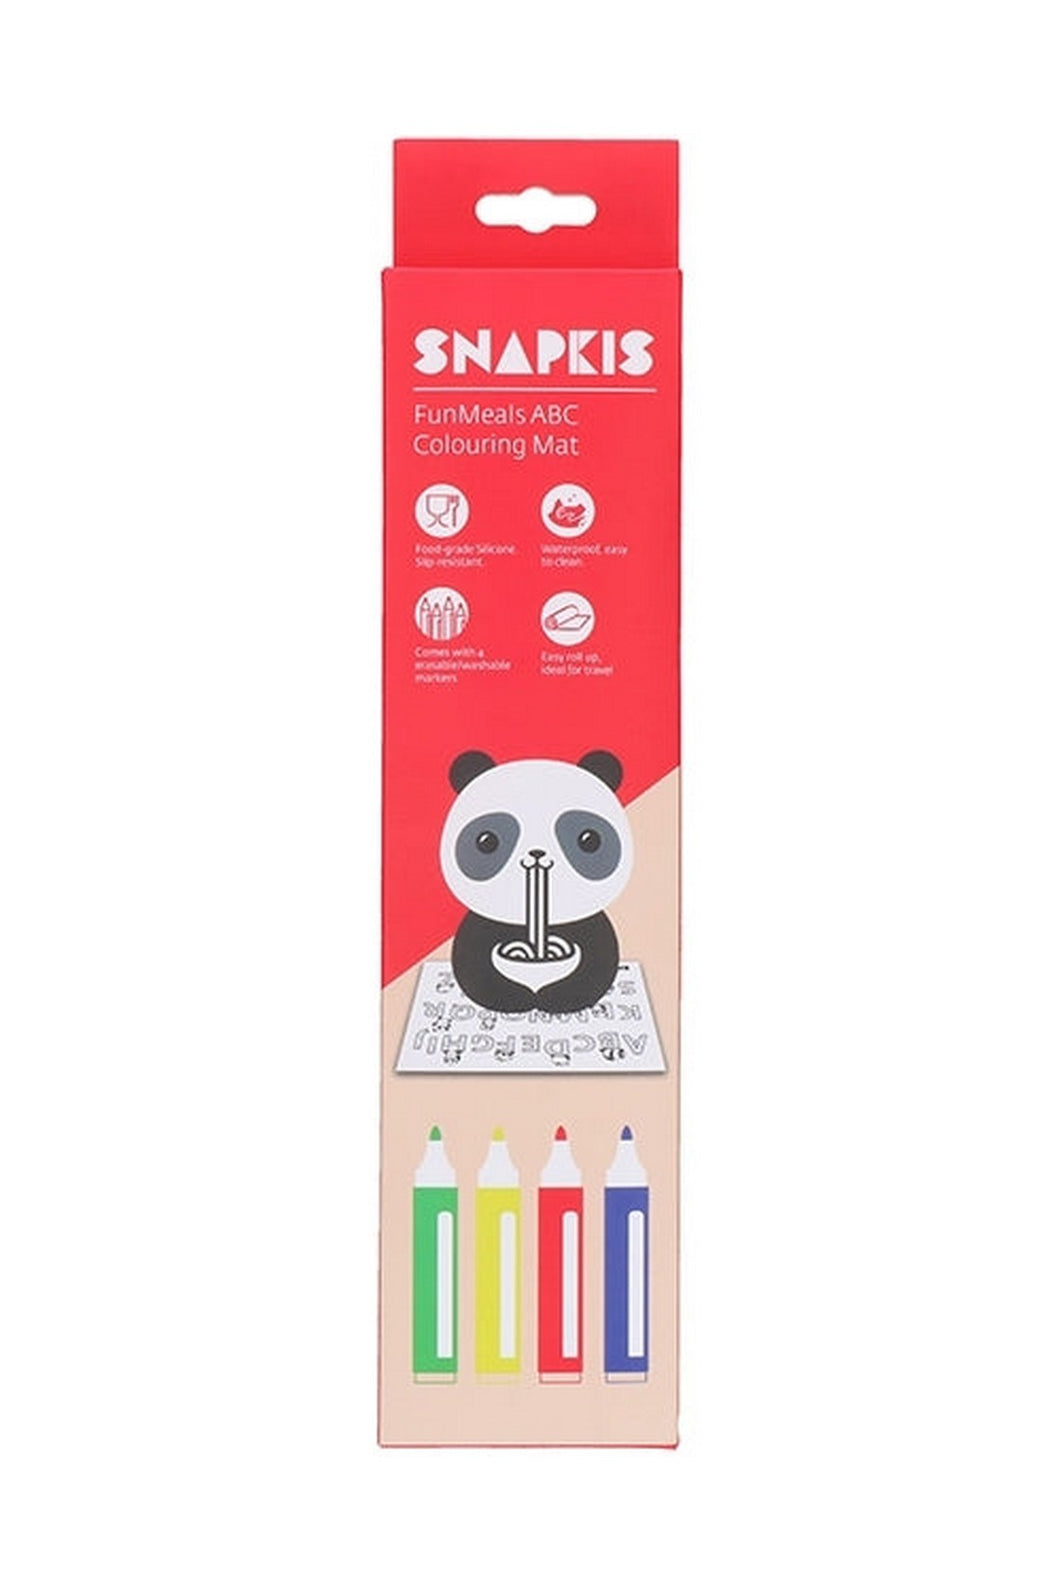 Snapkis Funmeals Colouring Placemat Abc